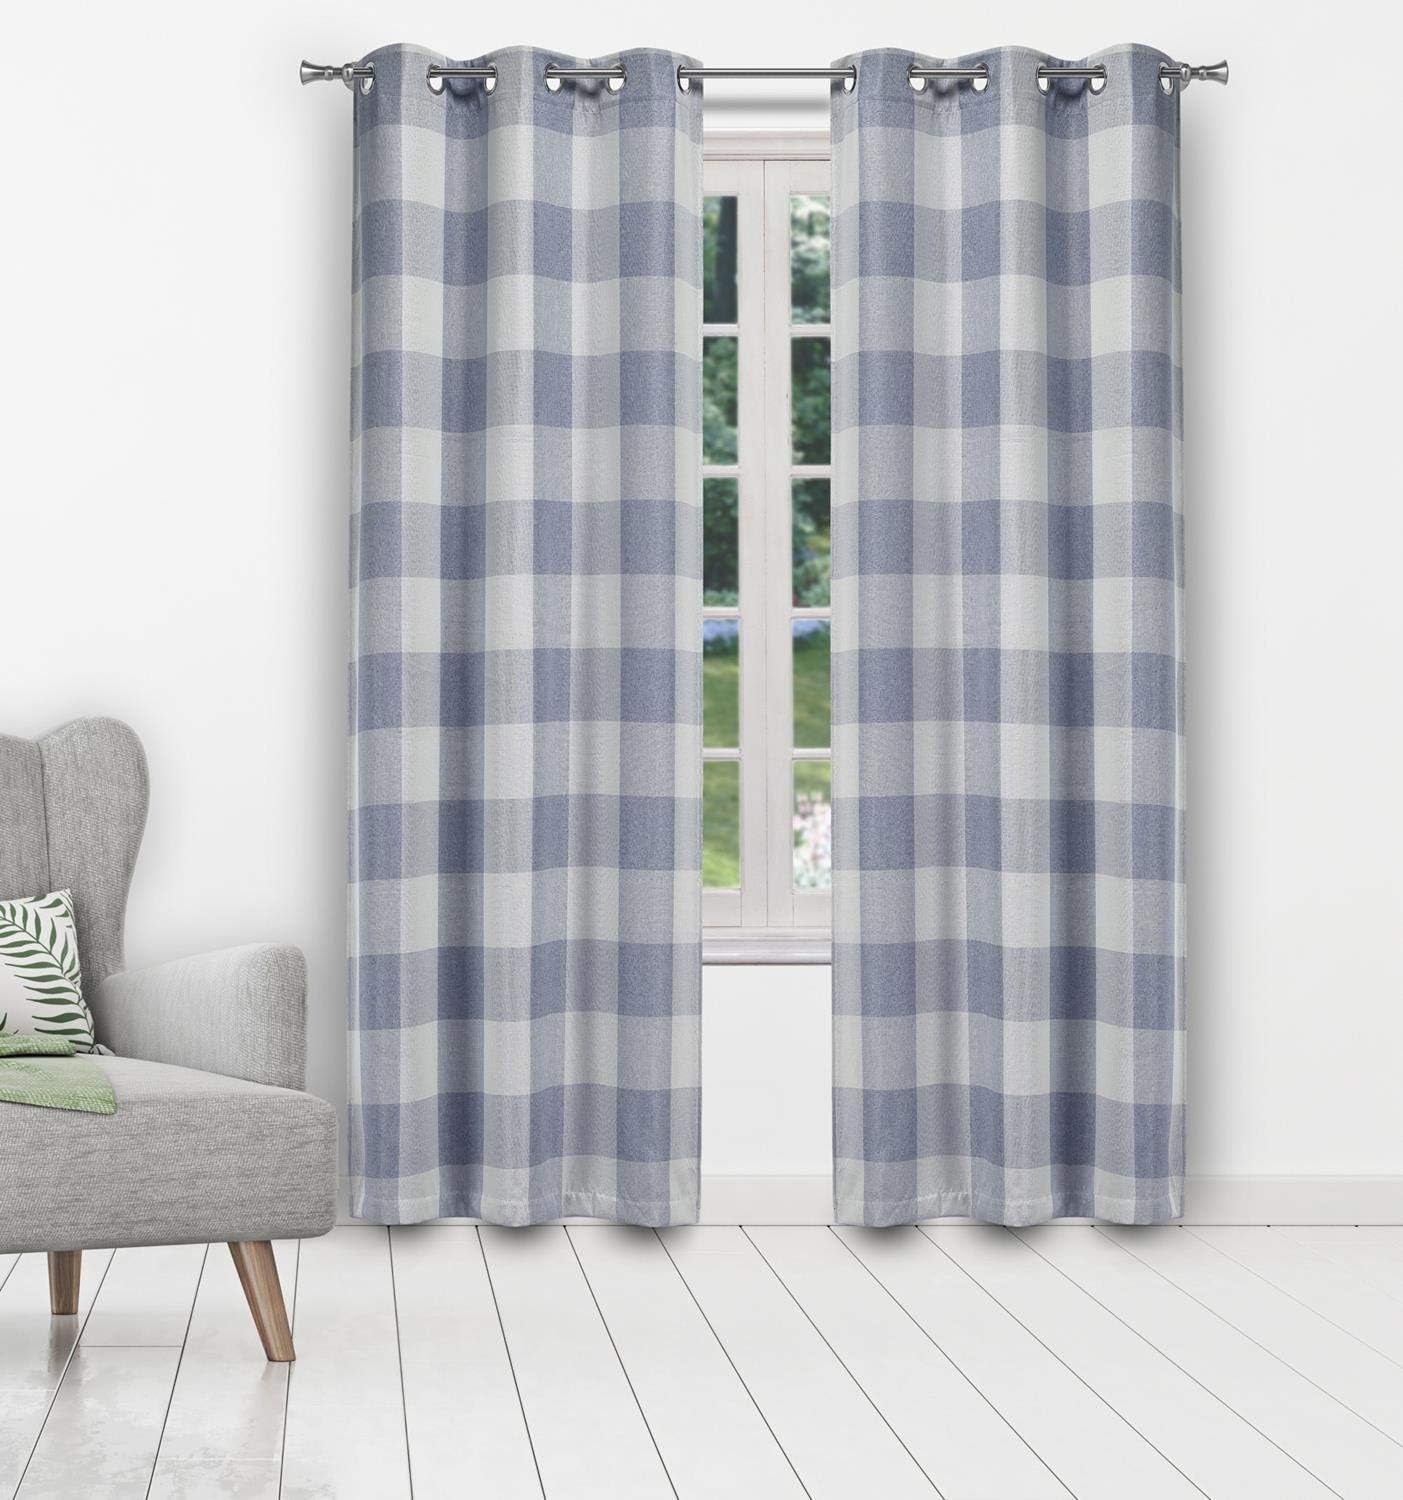 Blackout 365 Aaron Checkered Set Buffalo Plaid Blackout Bedroom-Insulated and Energy Efficient Rod Pocket Window Curtains for Living Room, 37 in X 84 in (W X L), Grey  Blackout 365 Blue 37 In X 108 In (W X L) 